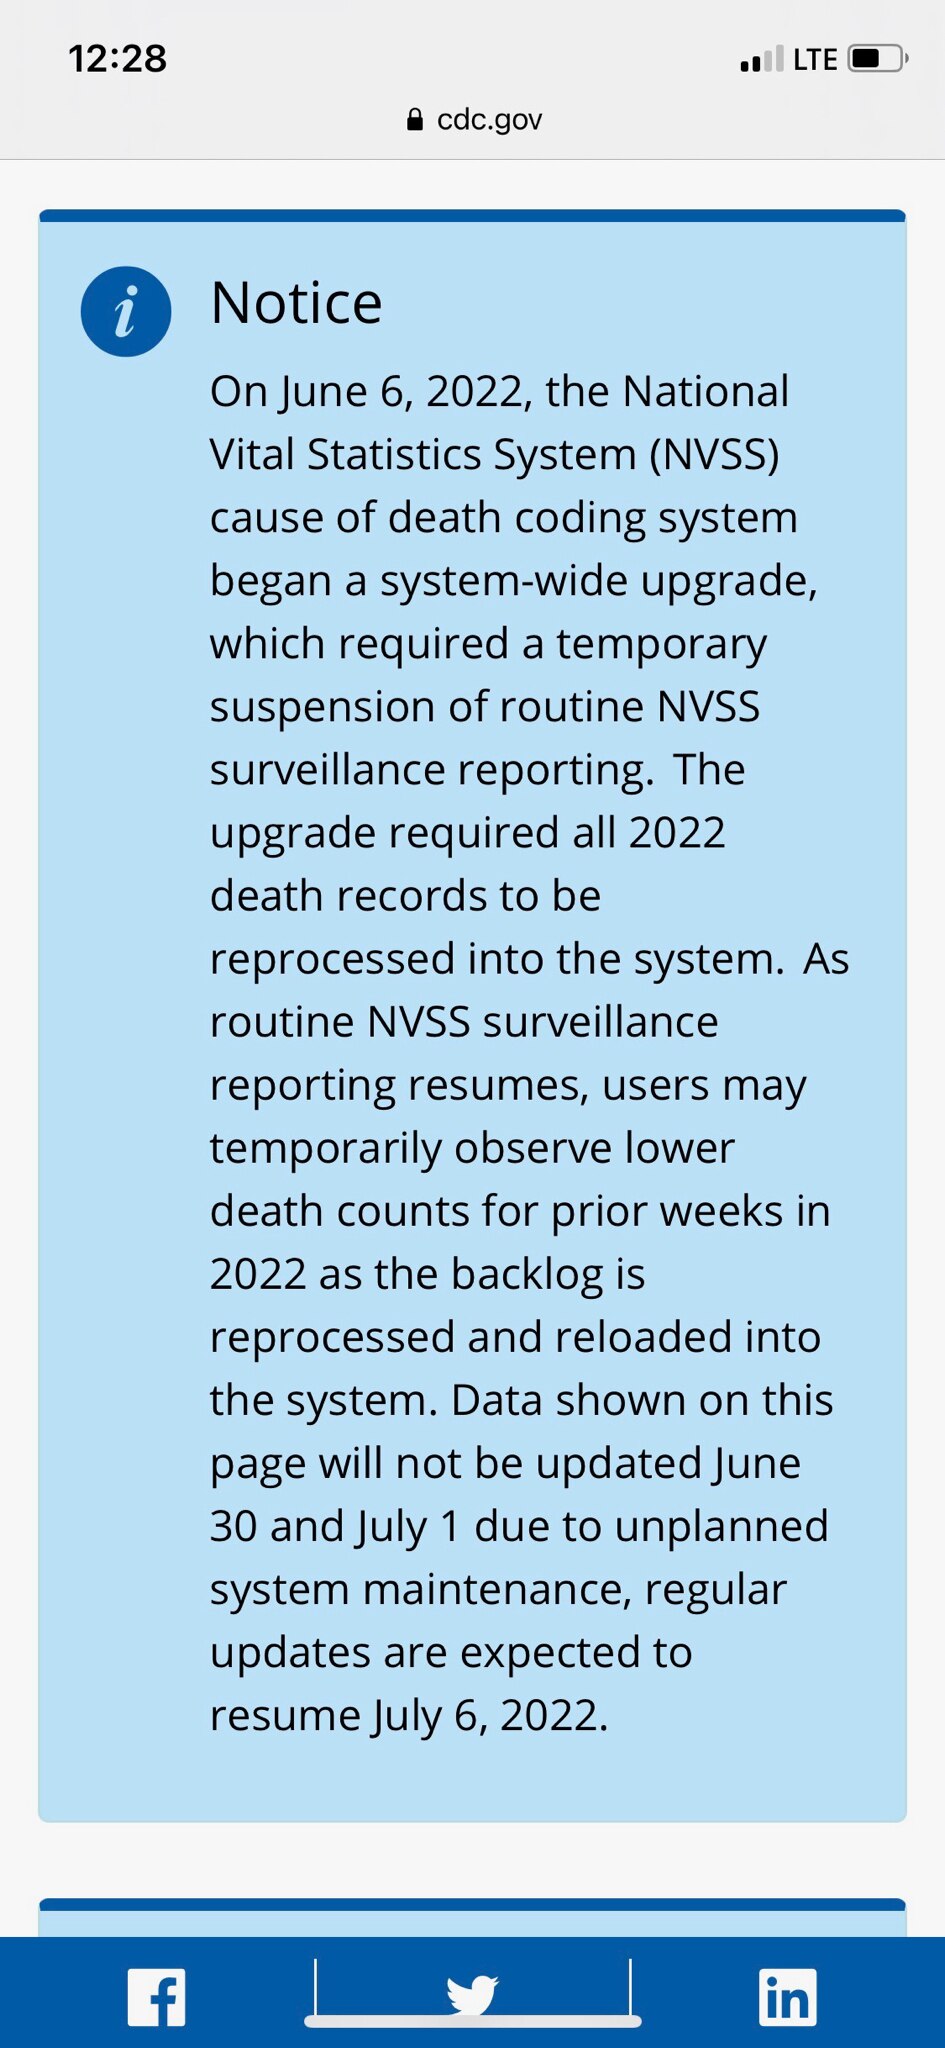 FYI…CDC is likely scrubbing data:   “Updated to push back date of availability due to unplanned system maintenance and now also say “this may temporarily observe lower death counts as backlog is reprocessed and reloaded into the system”. Since when was there a backlog? Does this mean the prior data was understated? If it is back online next week… When will the backlog be cleared? Looks like a typical CDC approach of destroying the data to solve the problem.”